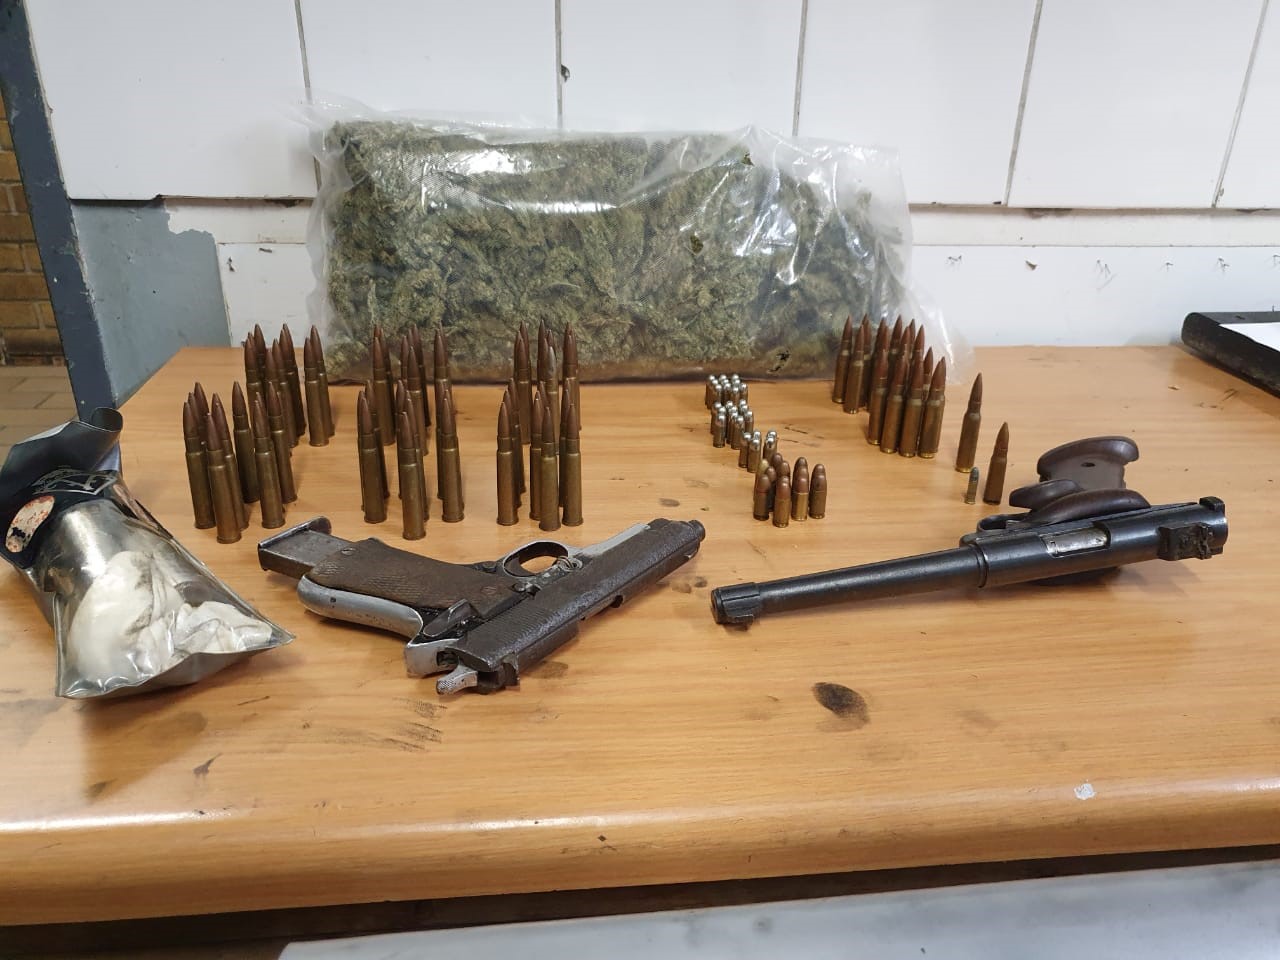 Armed suspects arrested by SAPS